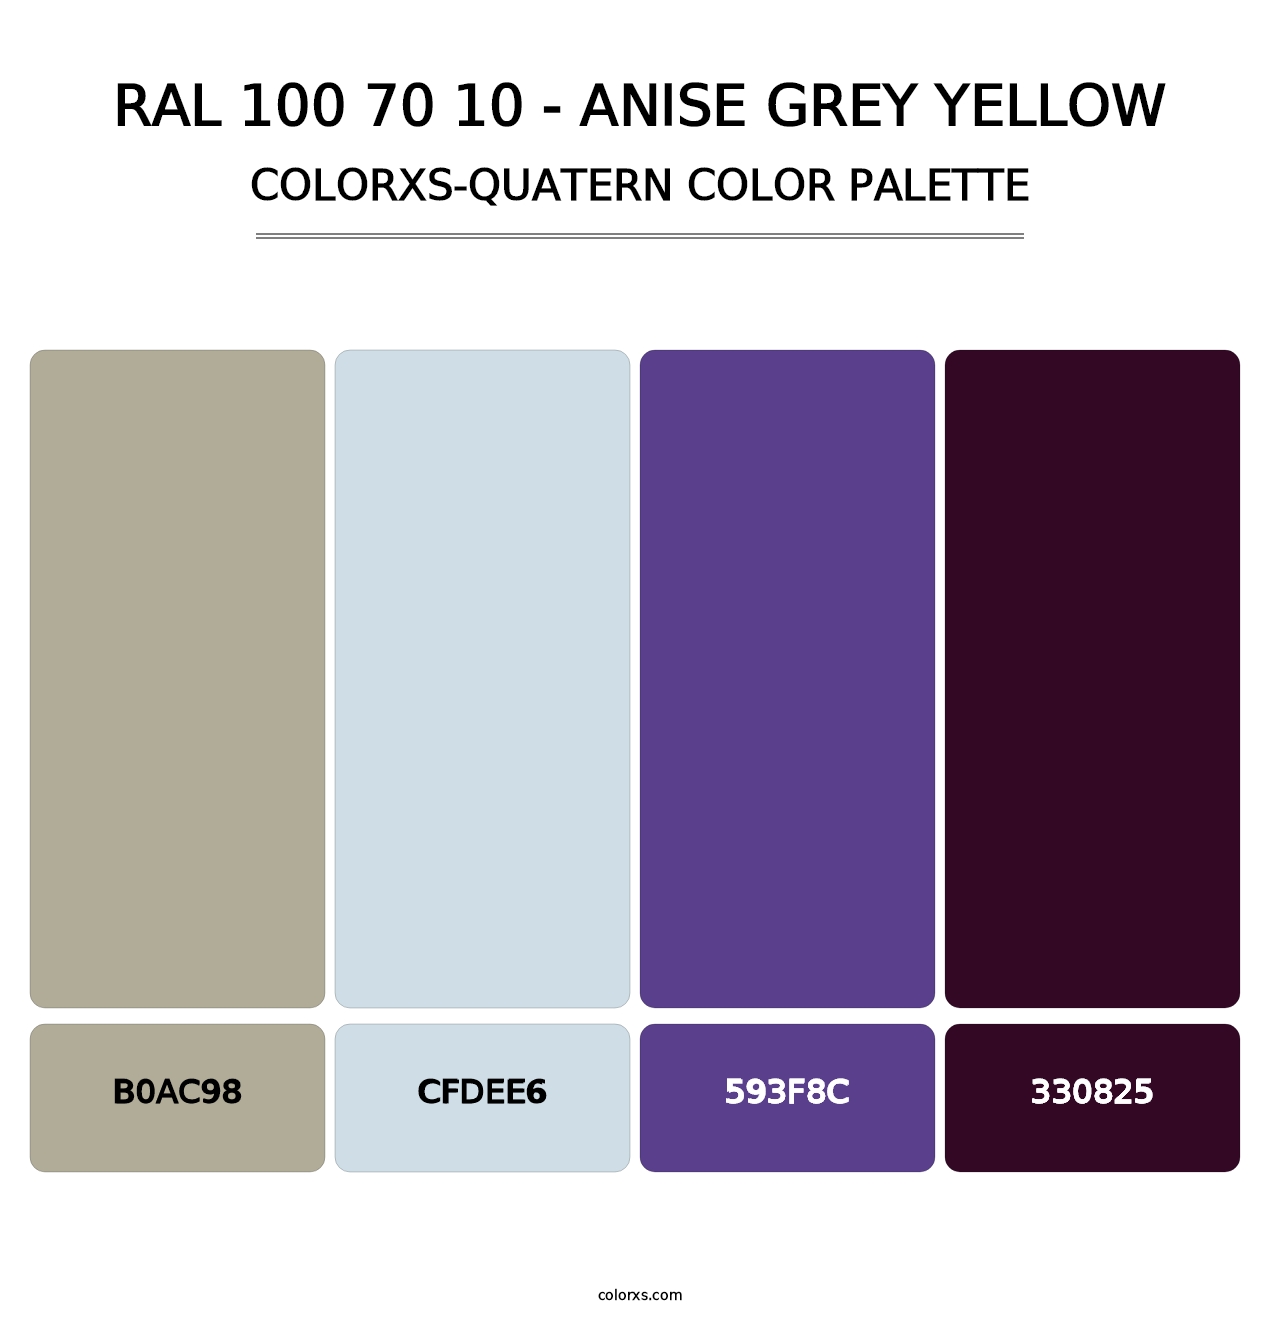 RAL 100 70 10 - Anise Grey Yellow - Colorxs Quatern Palette